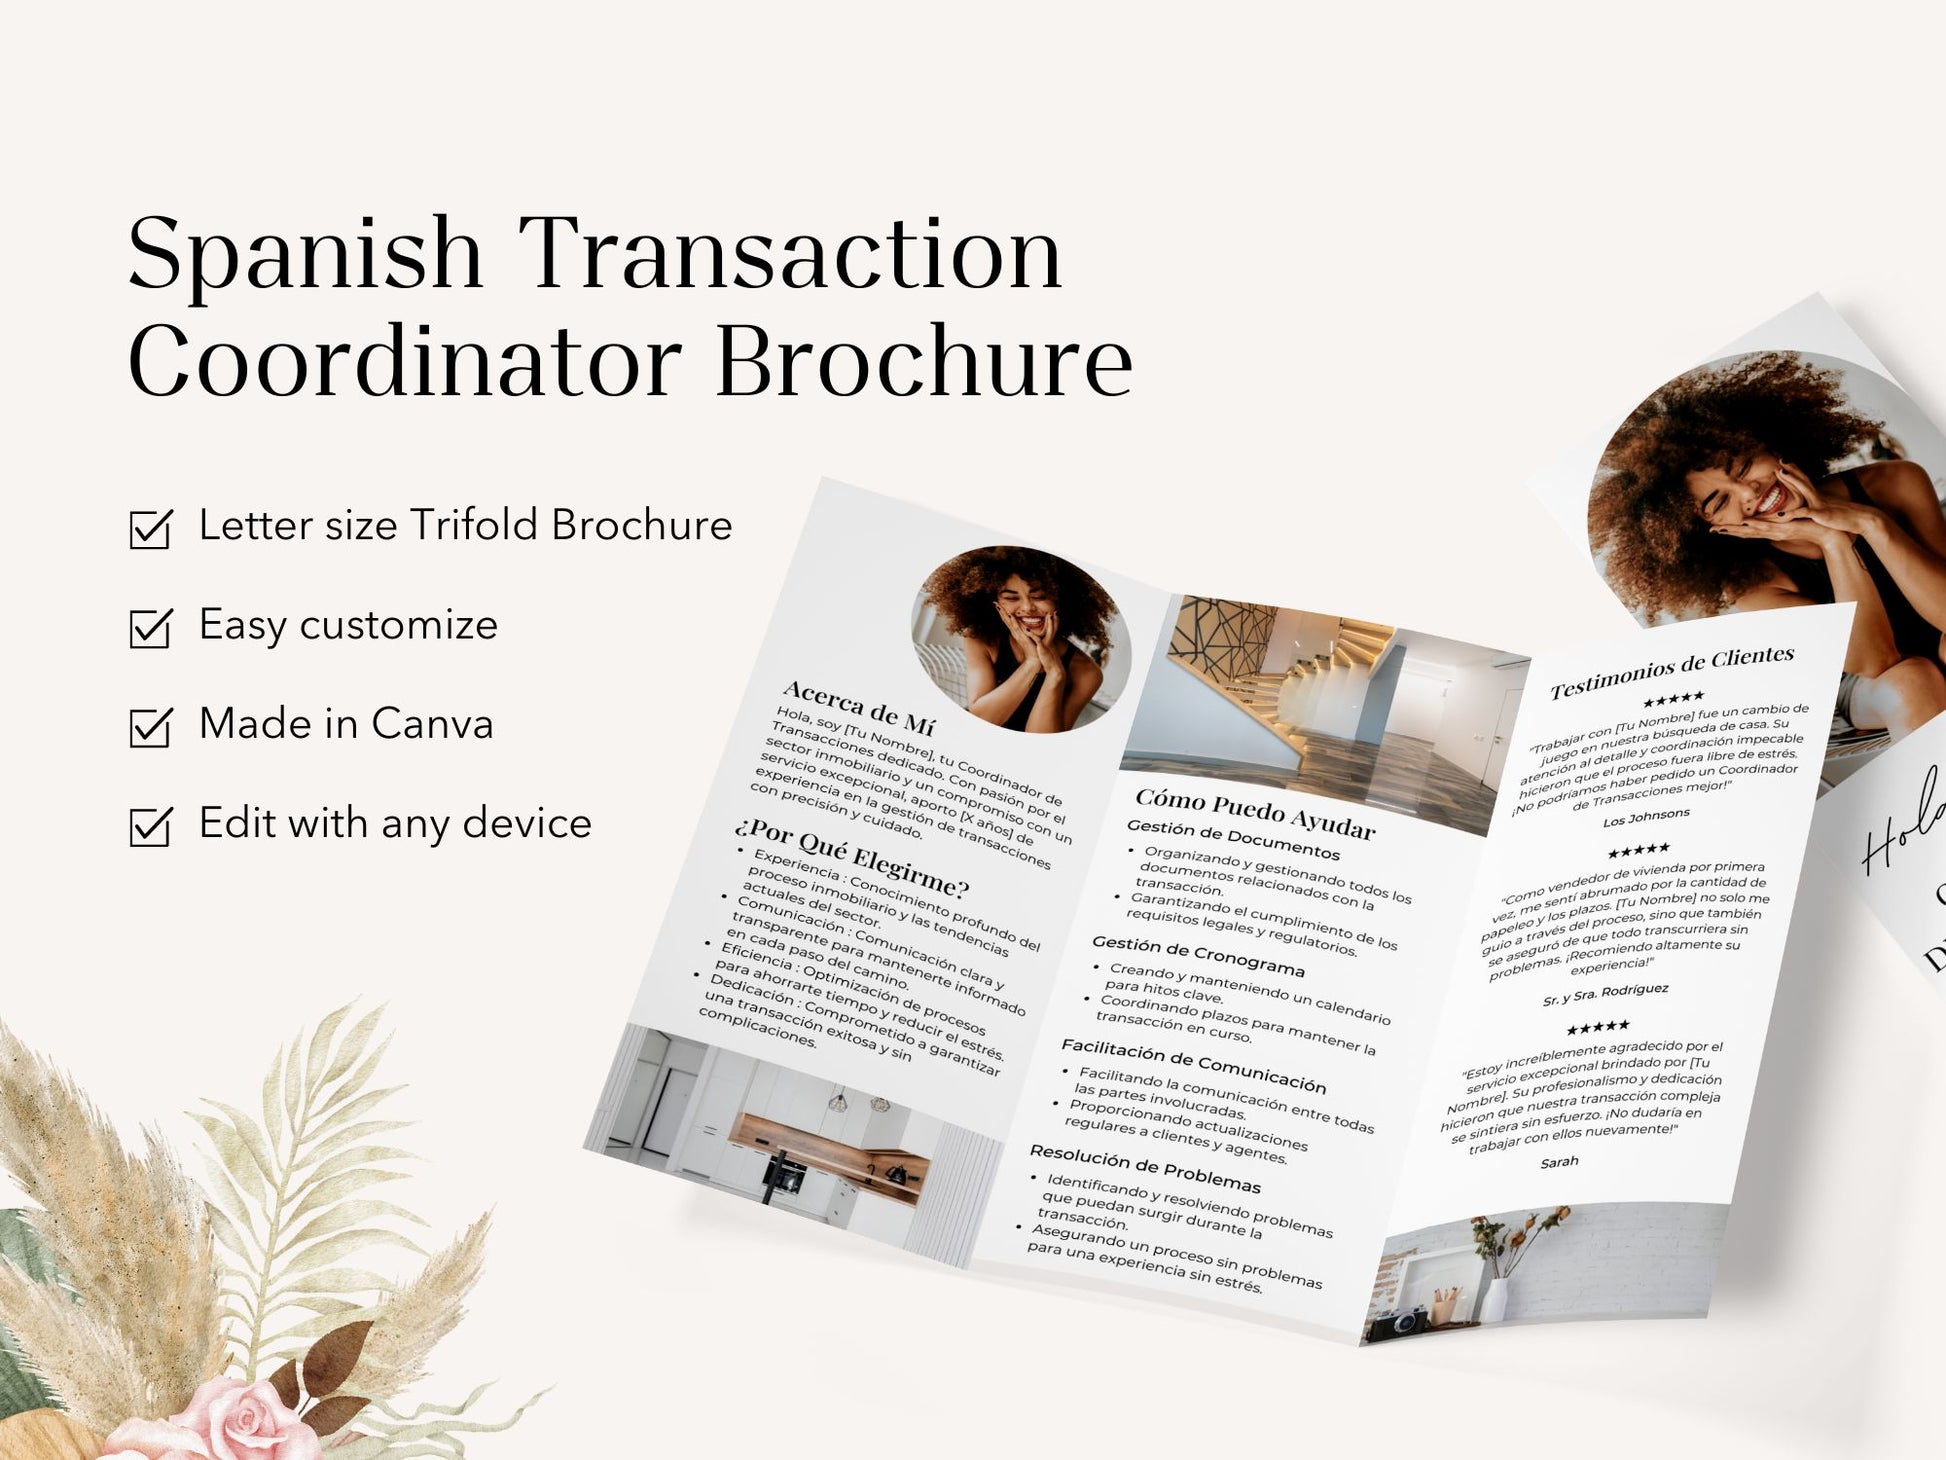 Spanish Transaction Coordinator Brochure - Impress your clients with clear communication and seamless transactions.